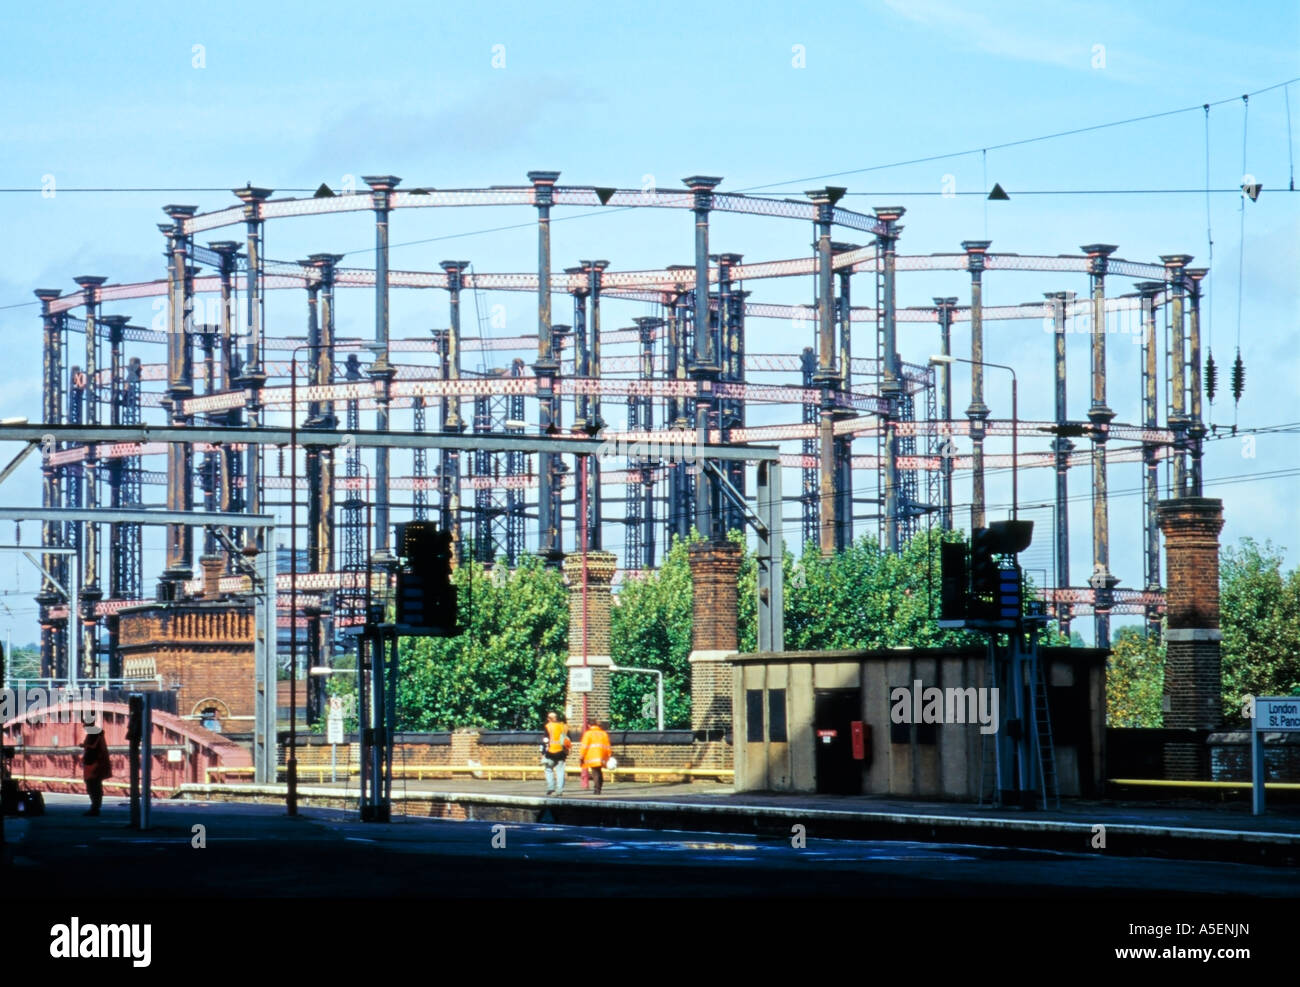 Three Gasometers or Gas Holders, King's Cross Station London England Great Britain Stock Photo